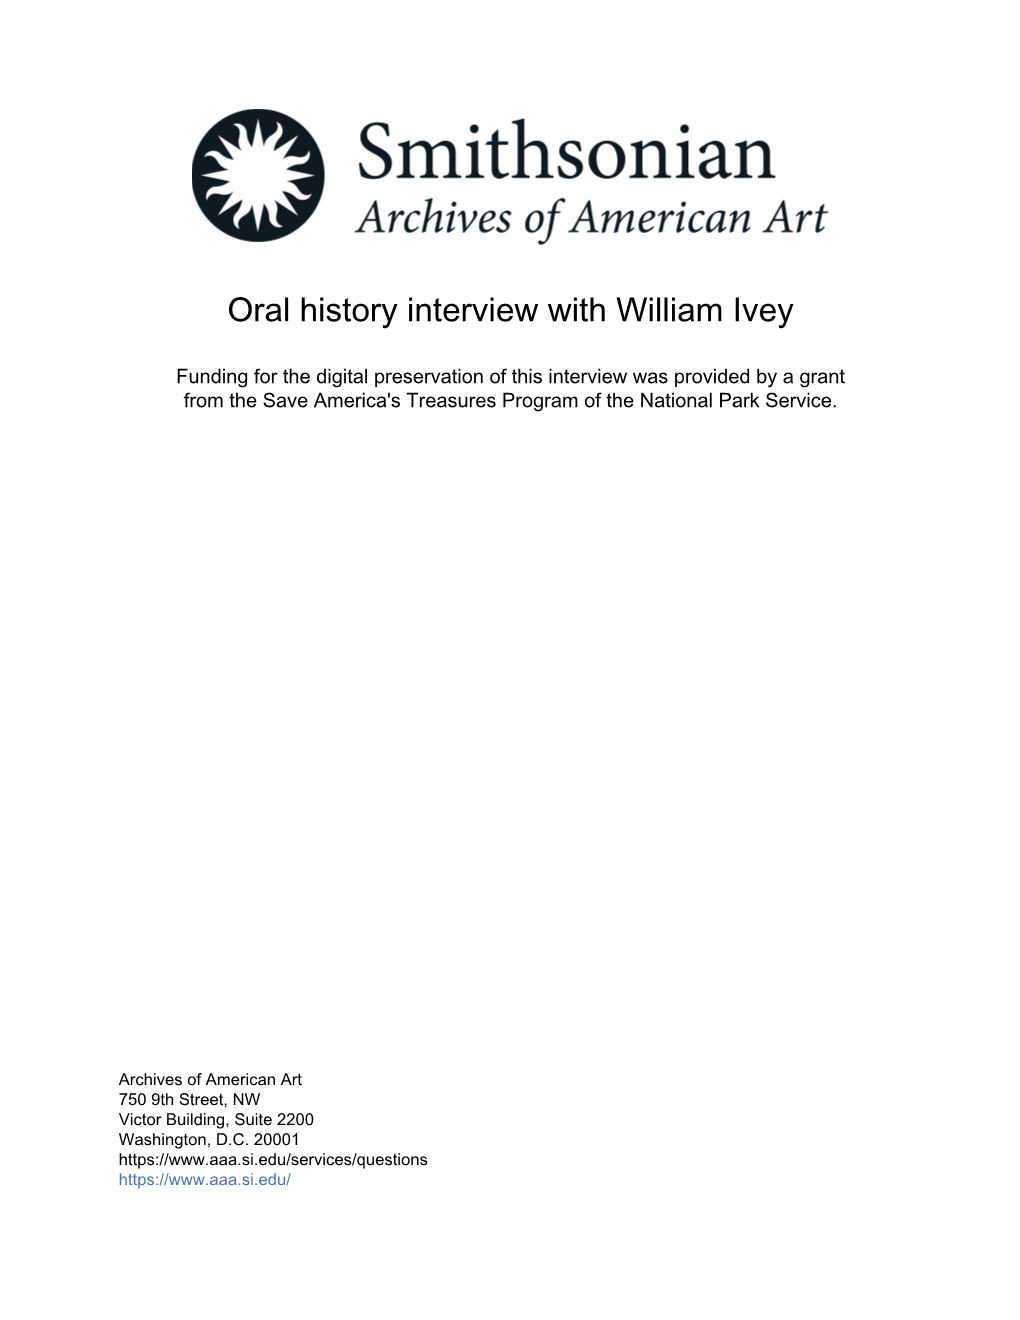 Oral History Interview with William Ivey